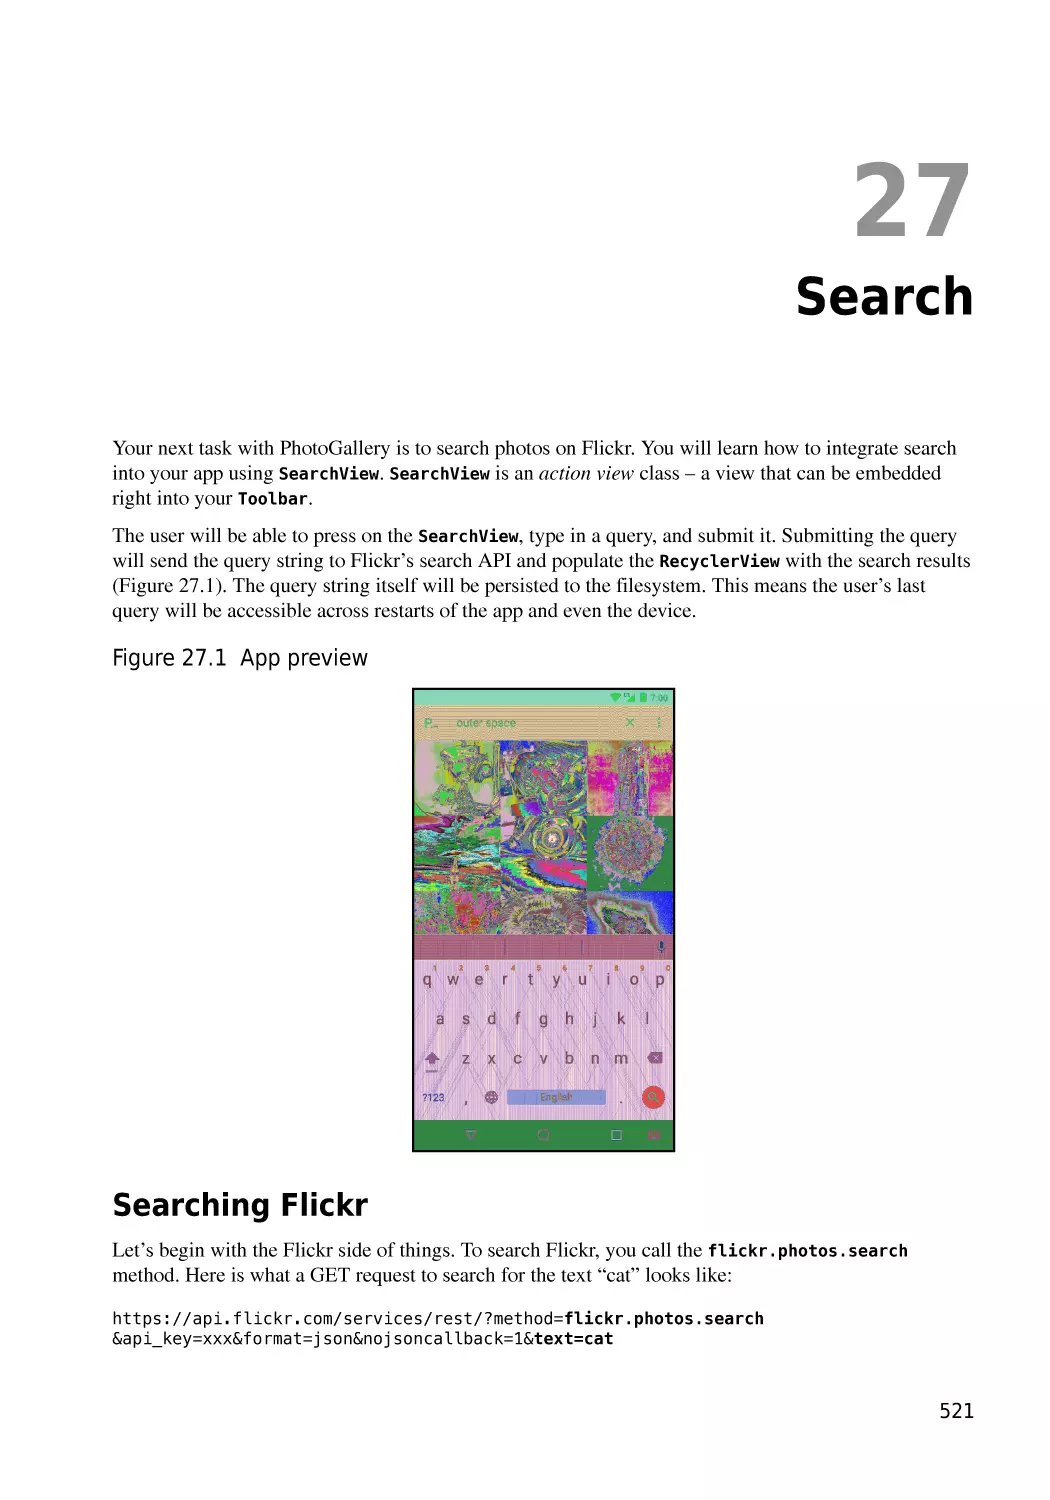 Chapter 27  Search
Searching Flickr